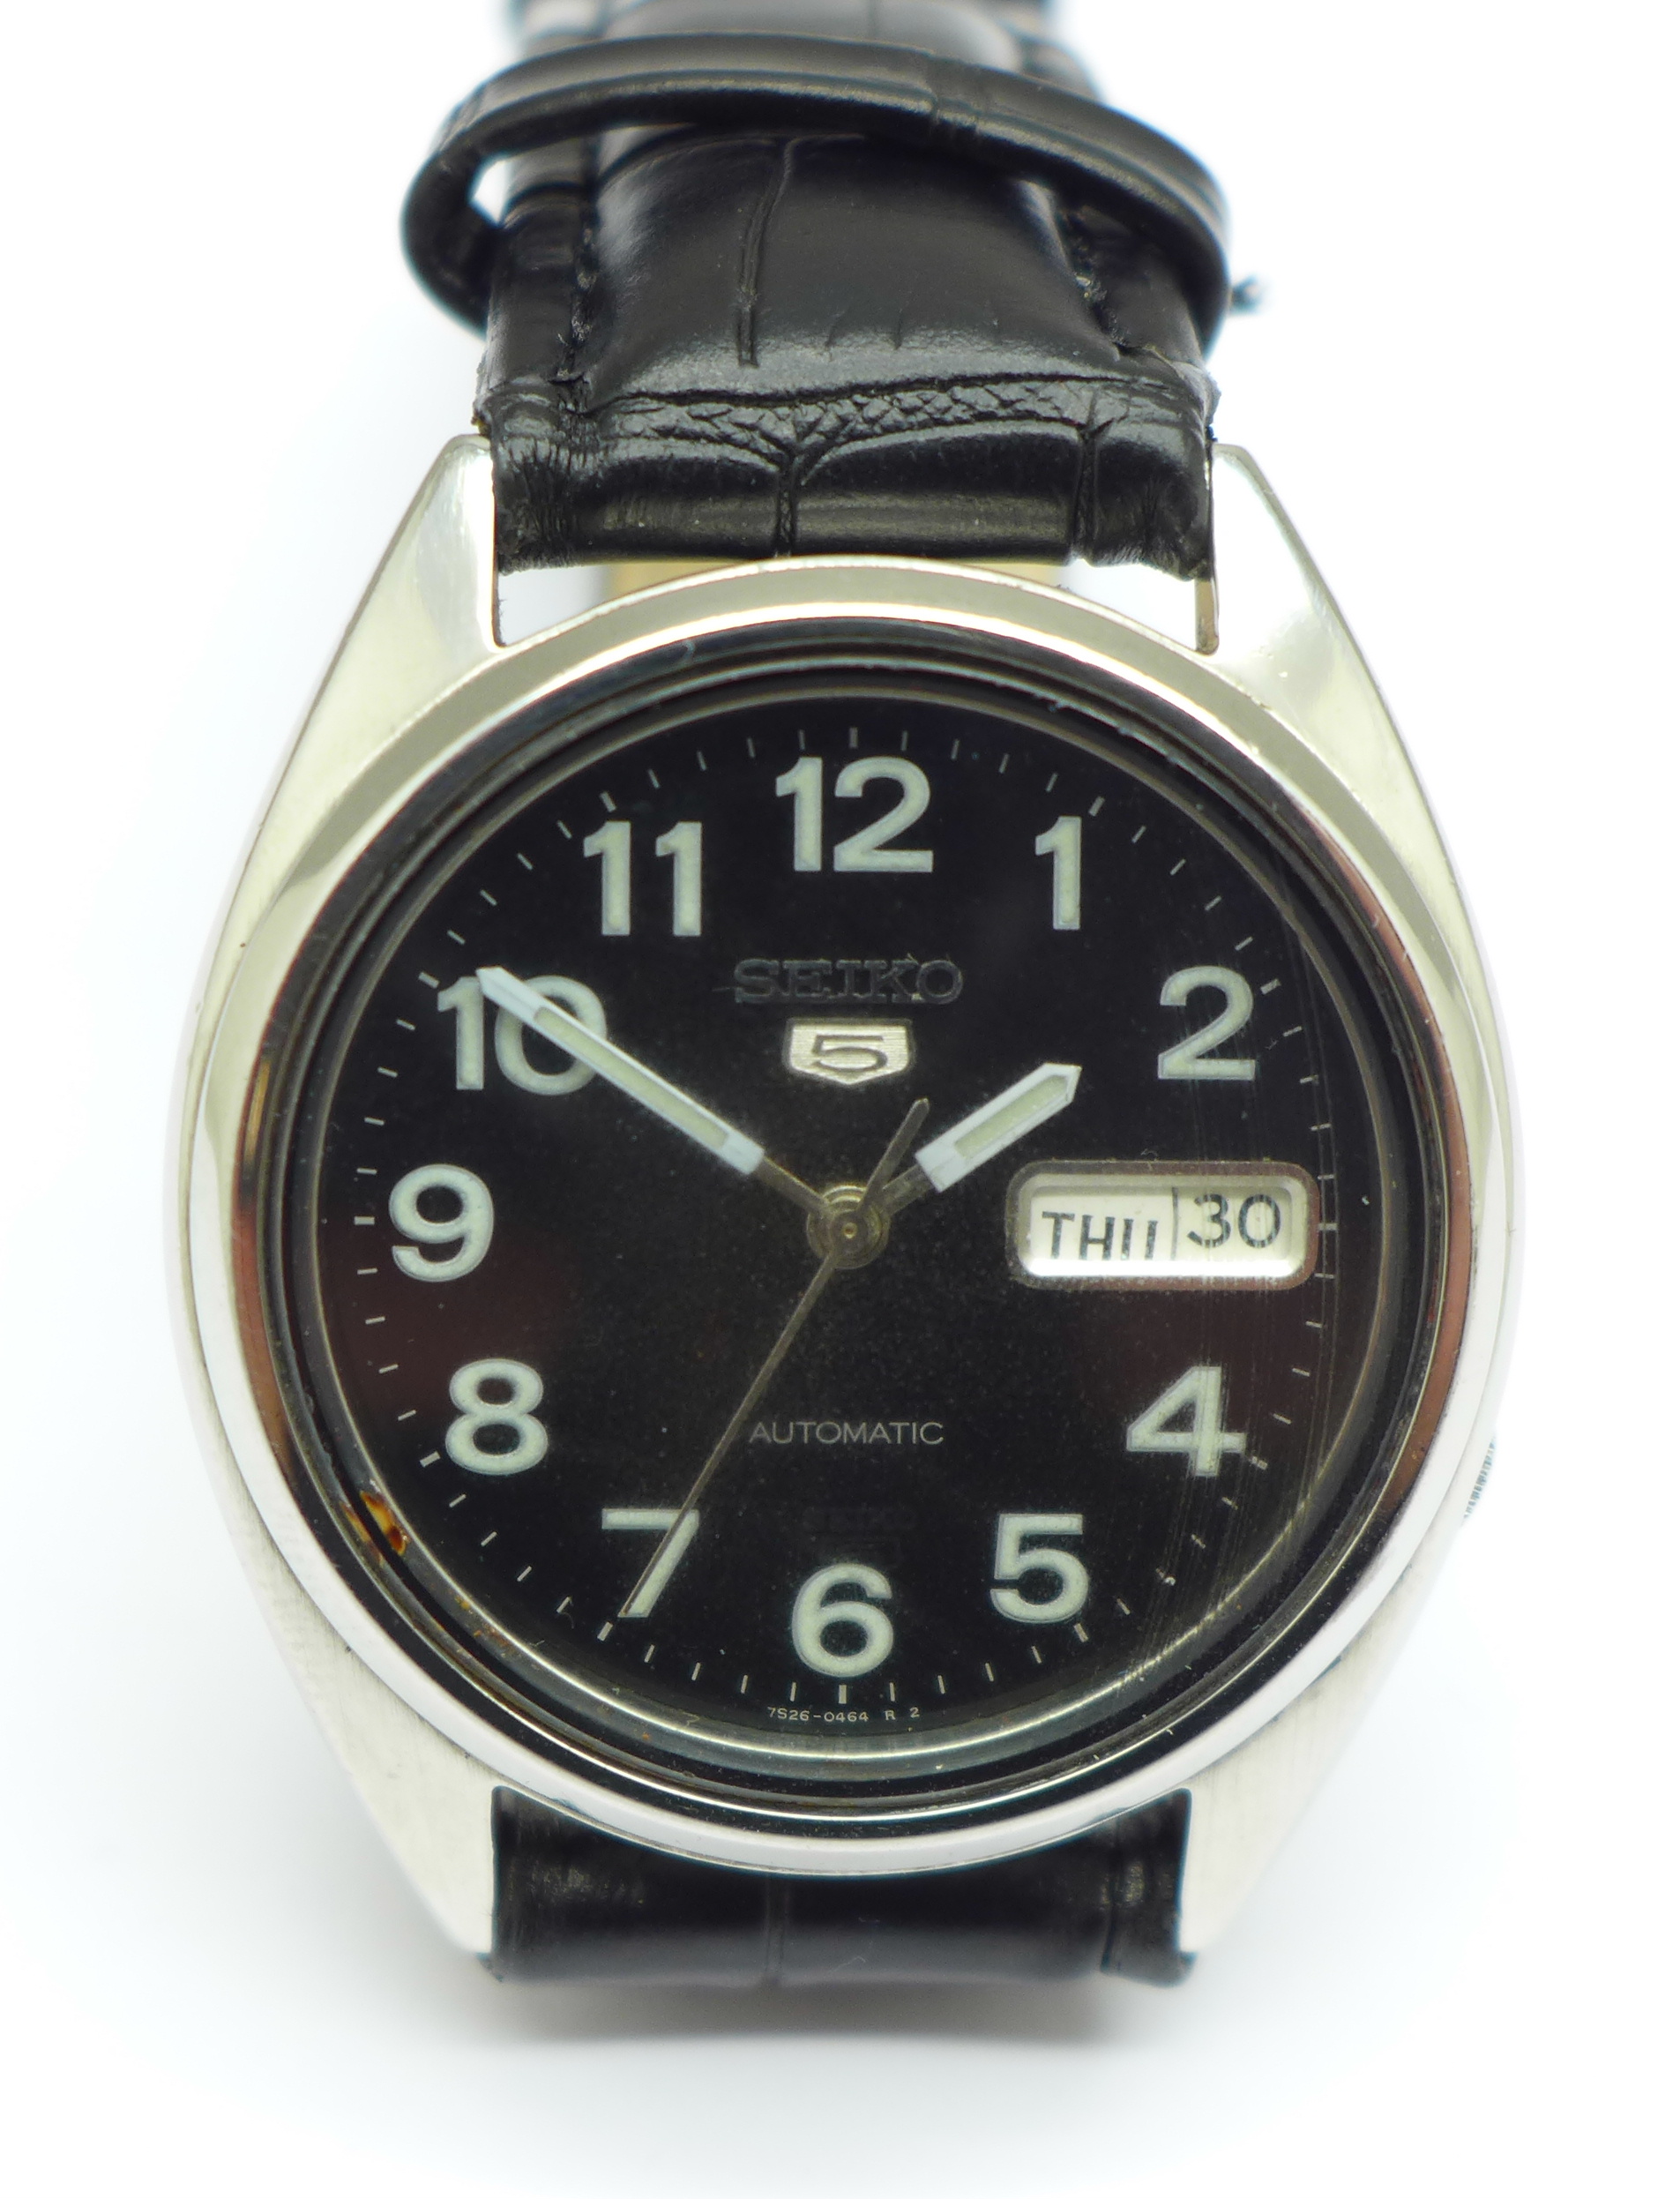 A Seiko 5 military style automatic wristwatch, 7S26 - Image 2 of 5